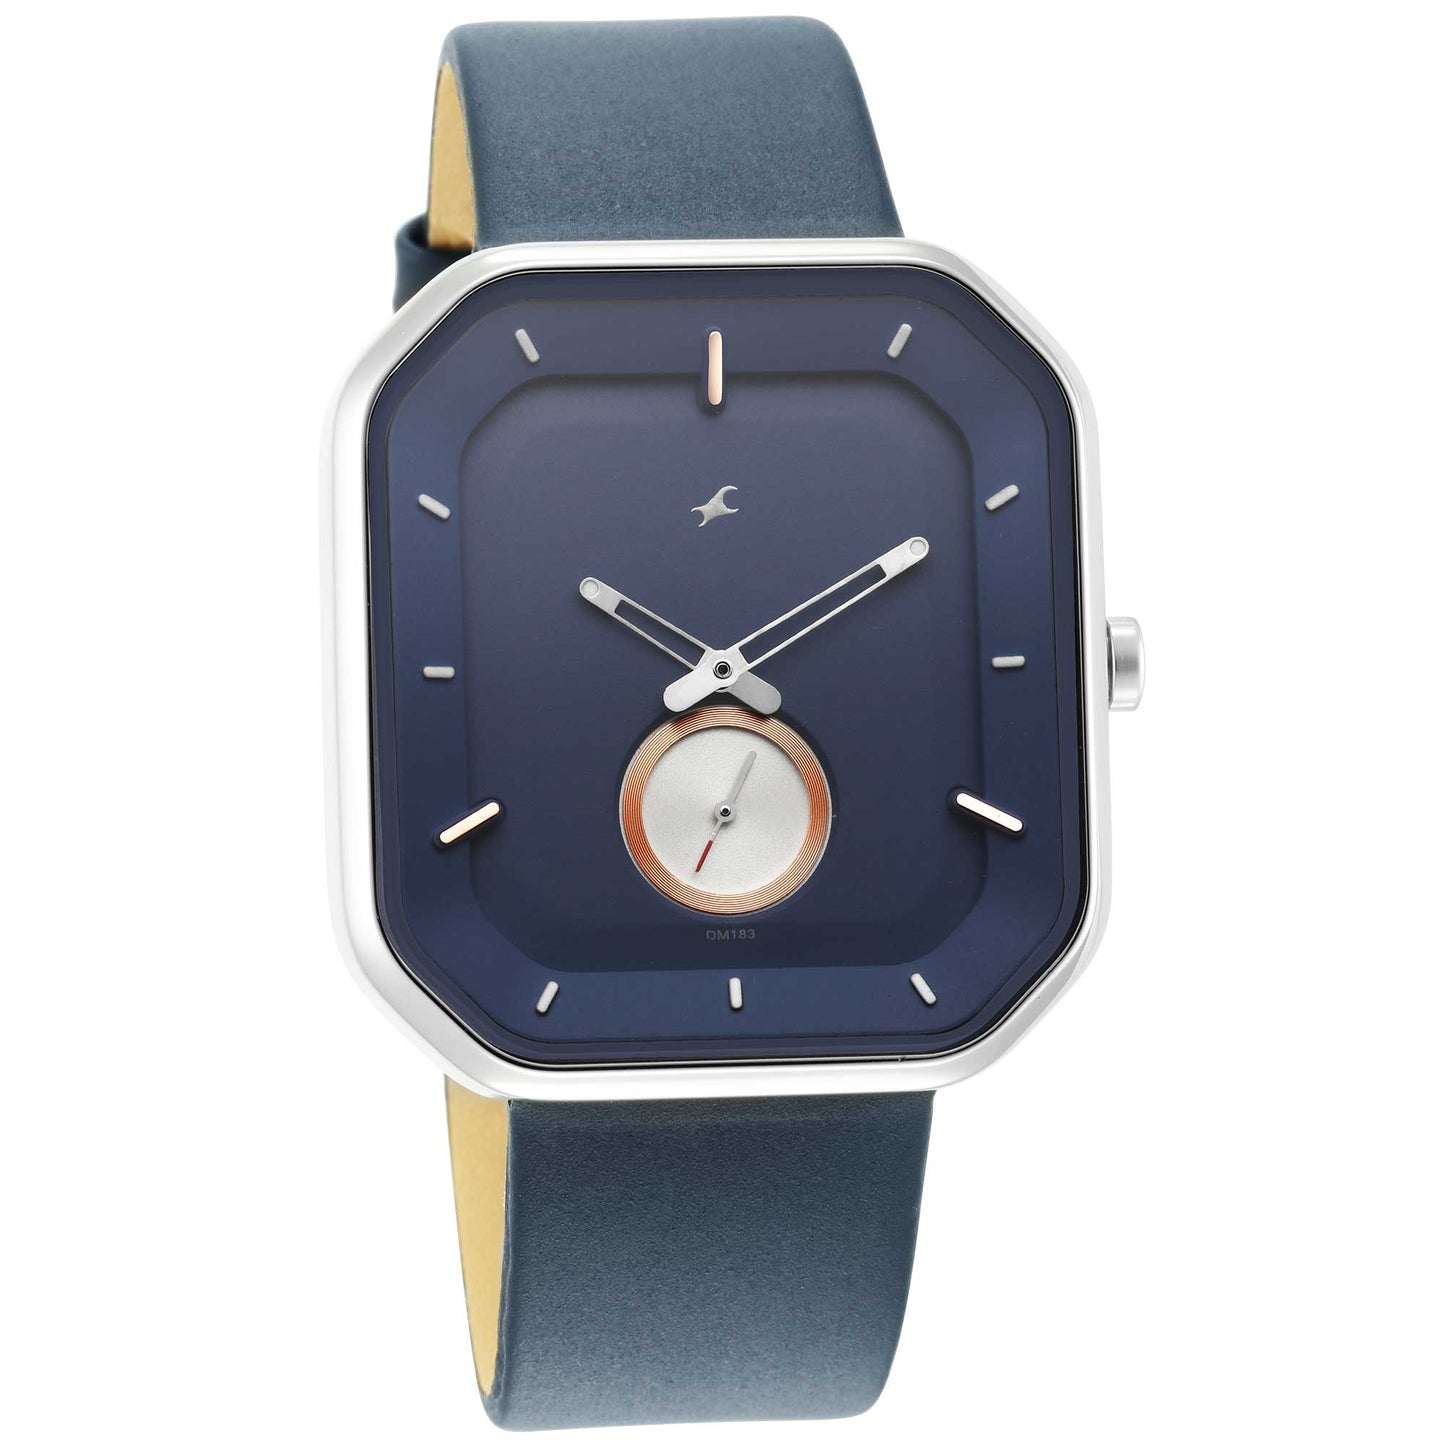 After Dark Blue Dial Leather Strap Watch for Guys